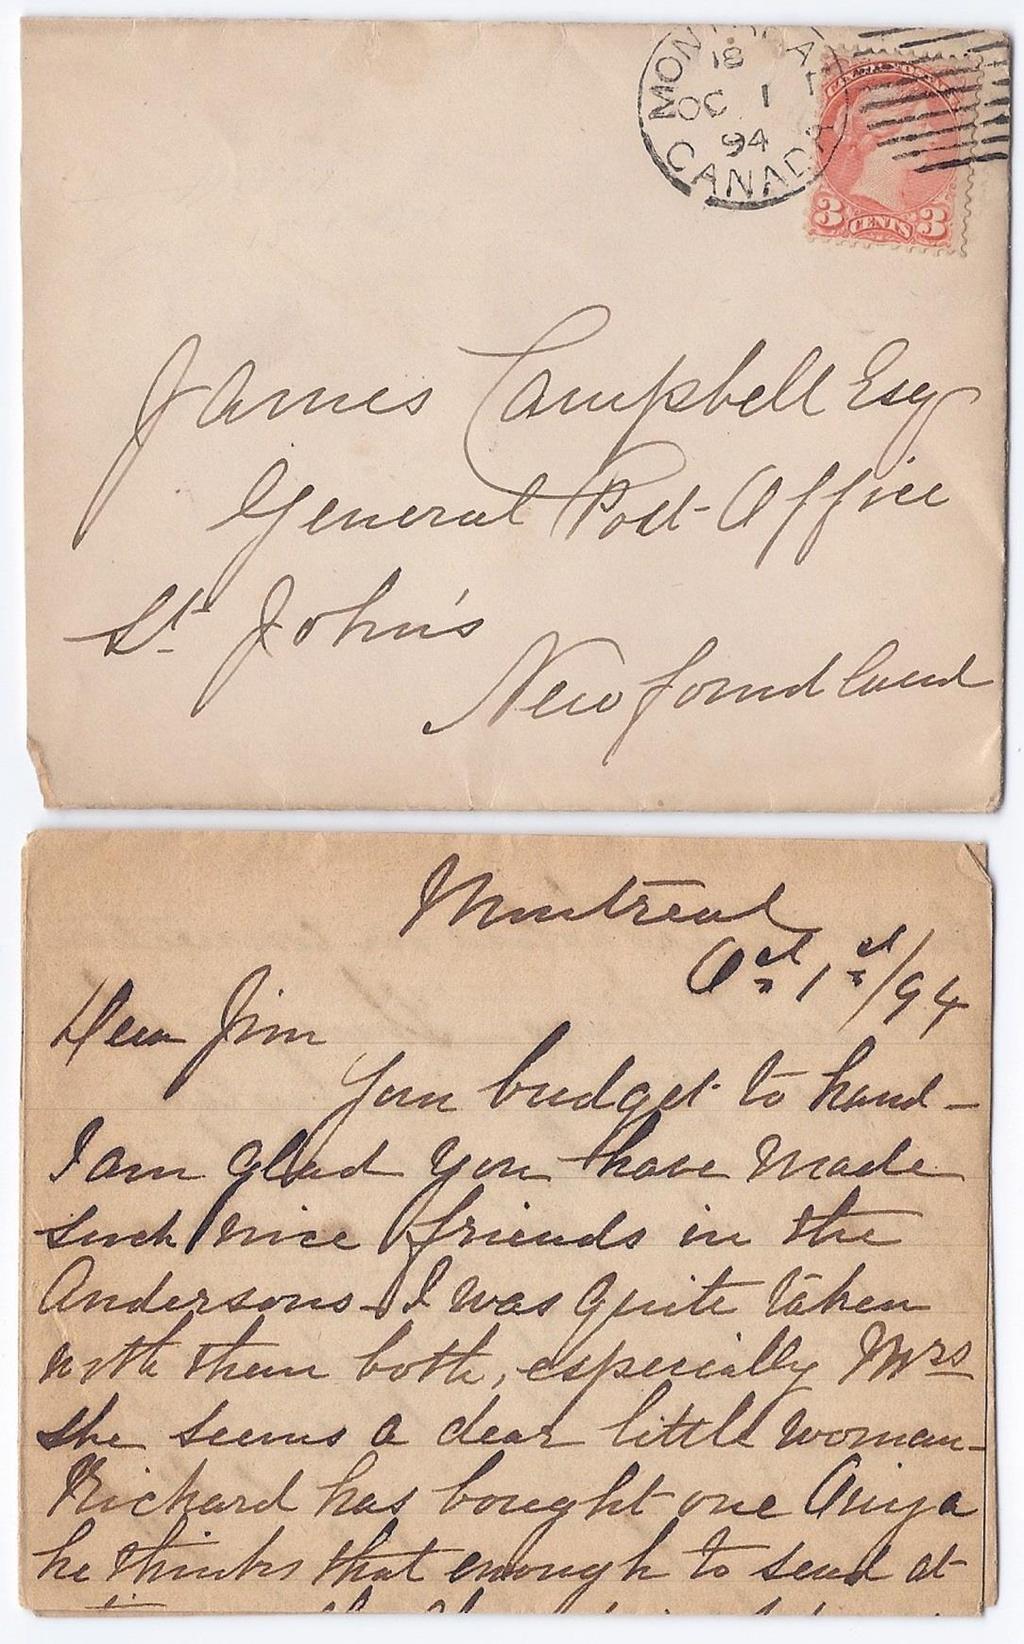 Page 3 / 16 Item 222-04 3c preferred rate to NFLD 1894, 3c SQ tied by Montreal duplex cancel on cover paying 3 cents per oz preferred letter rate to Newfoundland.